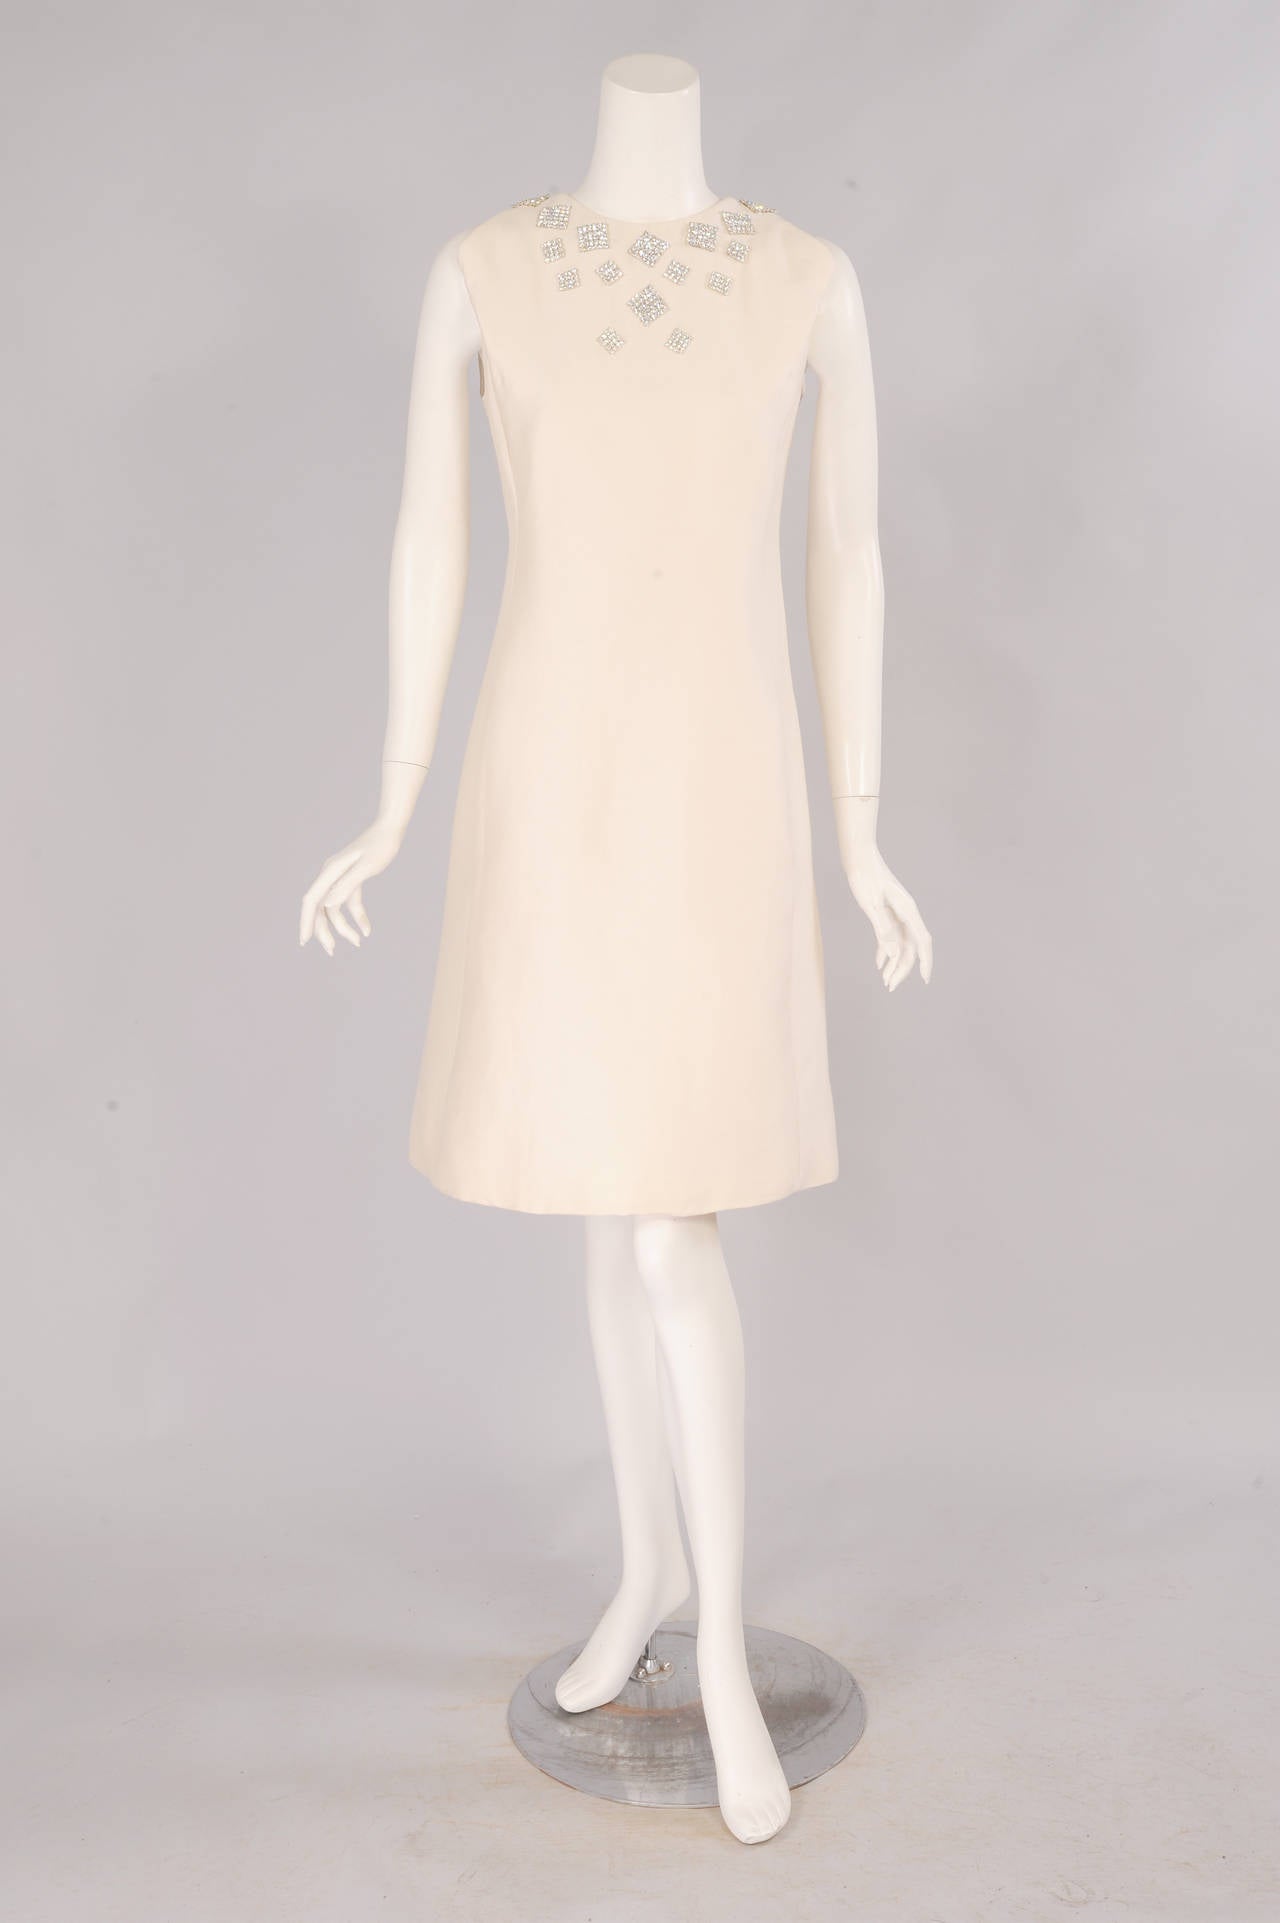 A chic silk dress, with an interesting shoulder detail, is embellished with squares of prong set rhinestones for a modern take on a diamond necklace. The dress has two pockets concealed in the seams, a center back zipper, and it is fully lined. It